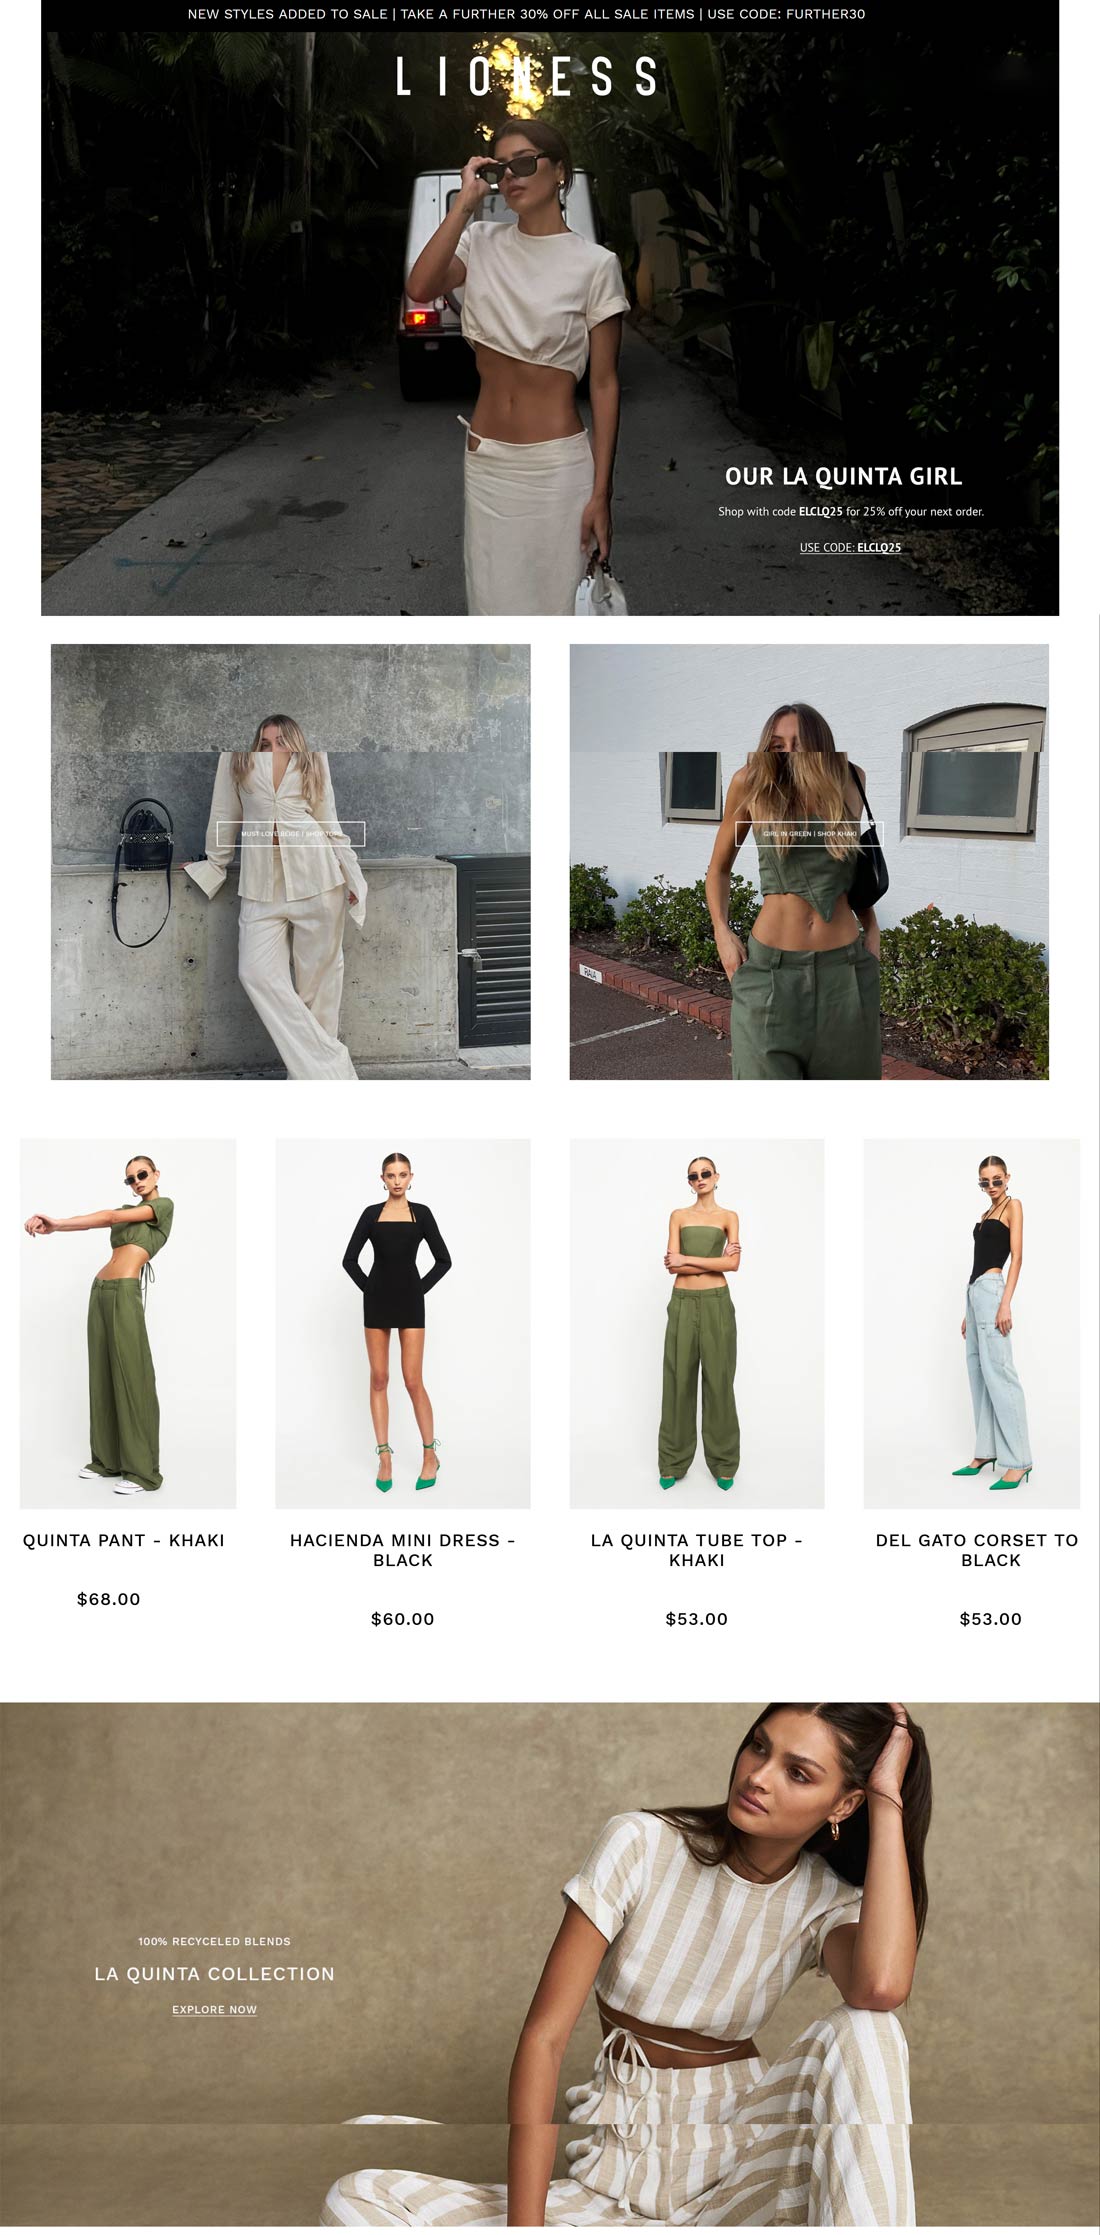 Lioness stores Coupon  25% off regular & extra 30% off sale items at Lioness fashion via promo codes ELCLQ25 and FURTHER30 #lioness 